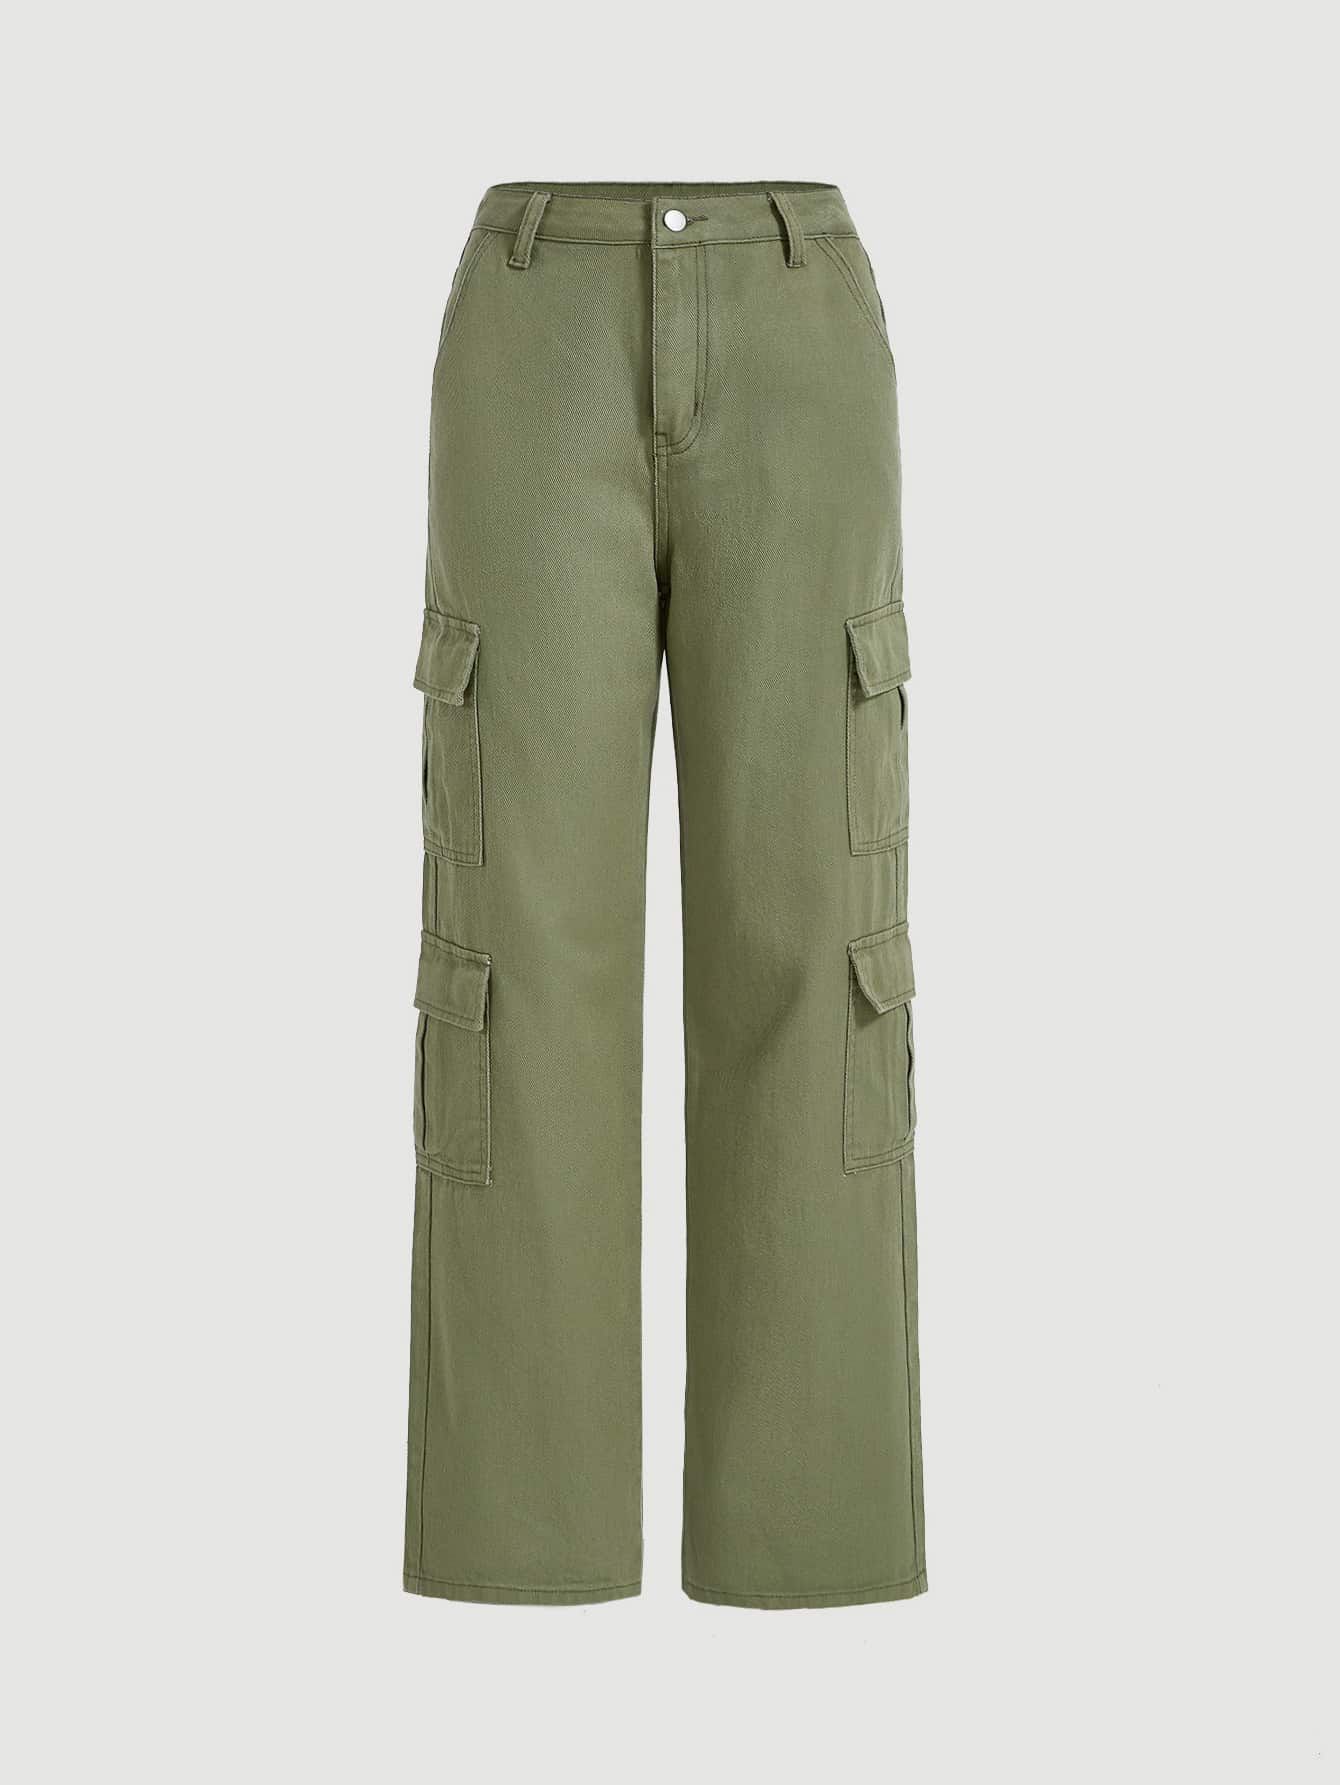 Investing in Quality: Why Army Cargo
Pants are a Wardrobe Staple